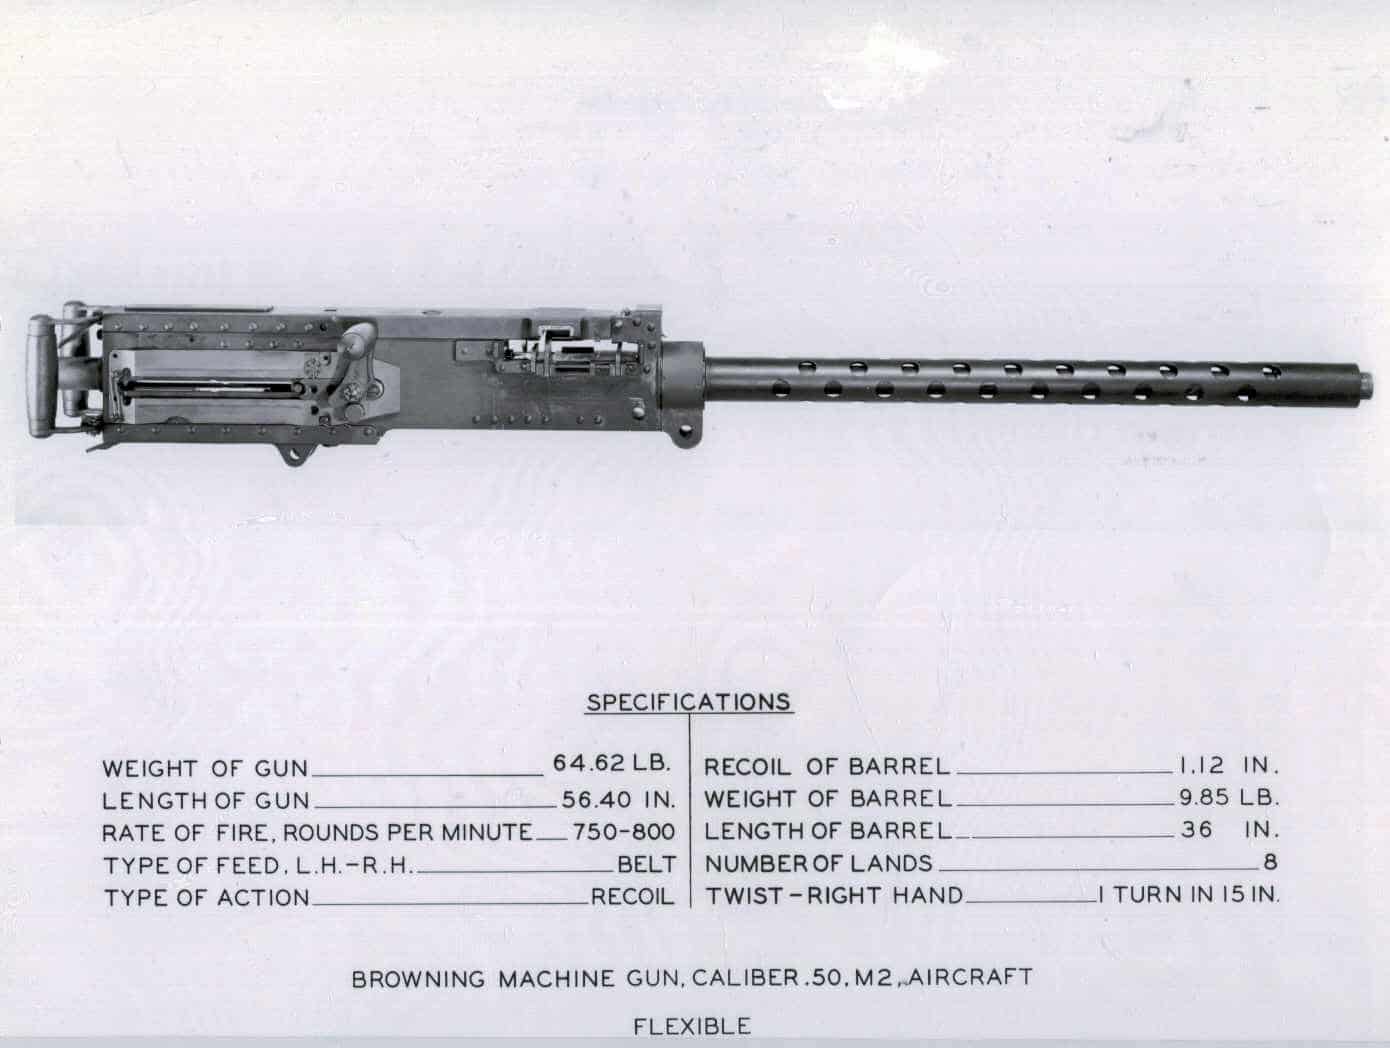 Specification chart for 50 cal Browning M2 "Flexible" gun